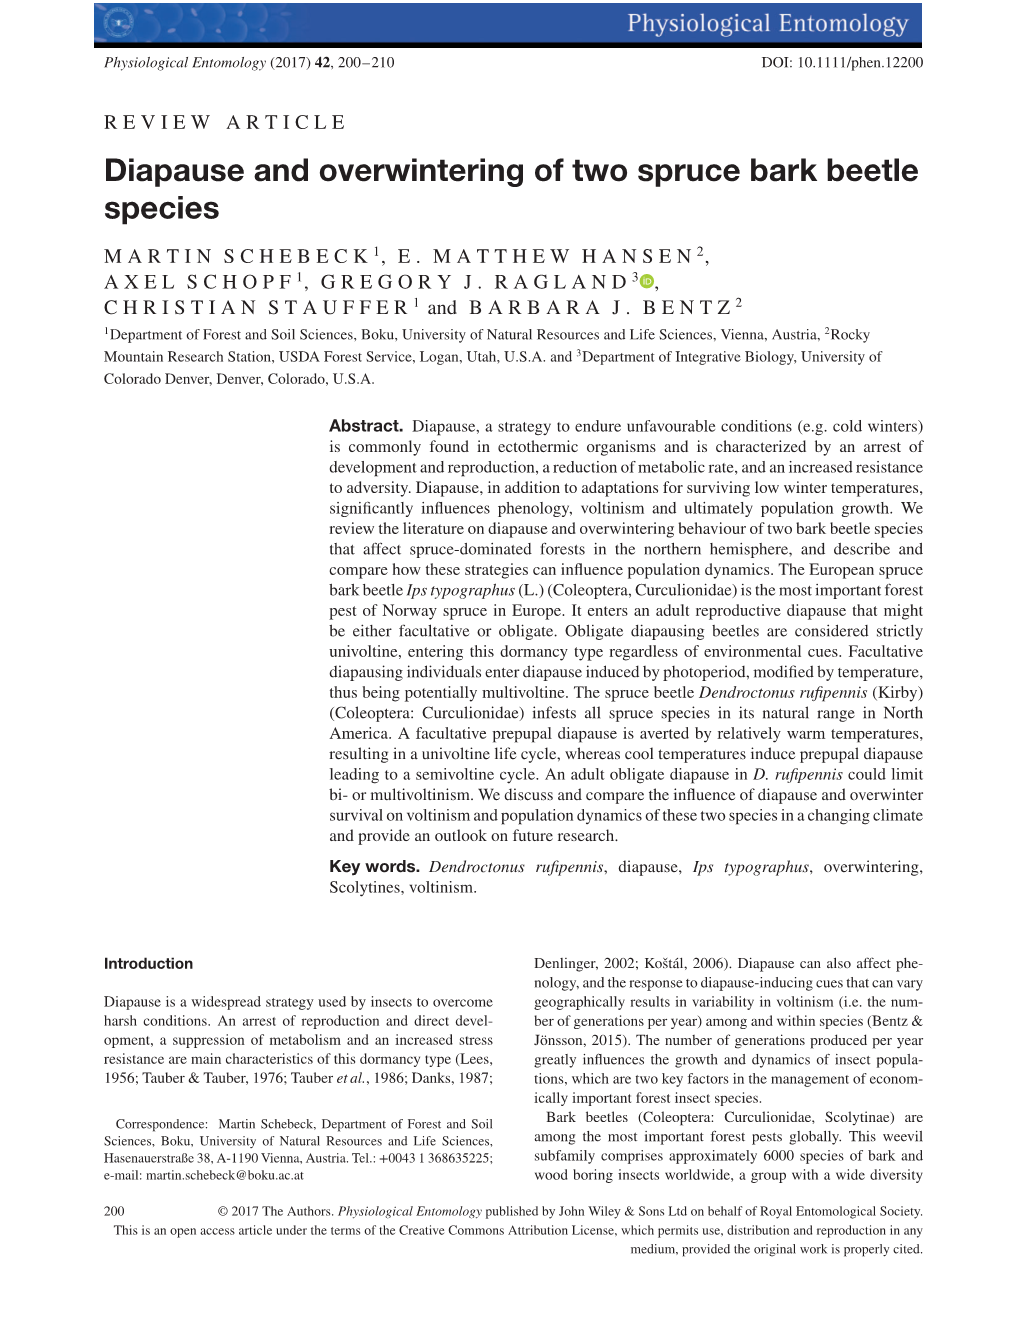 Diapause and Overwintering of Two Spruce Bark Beetle Species